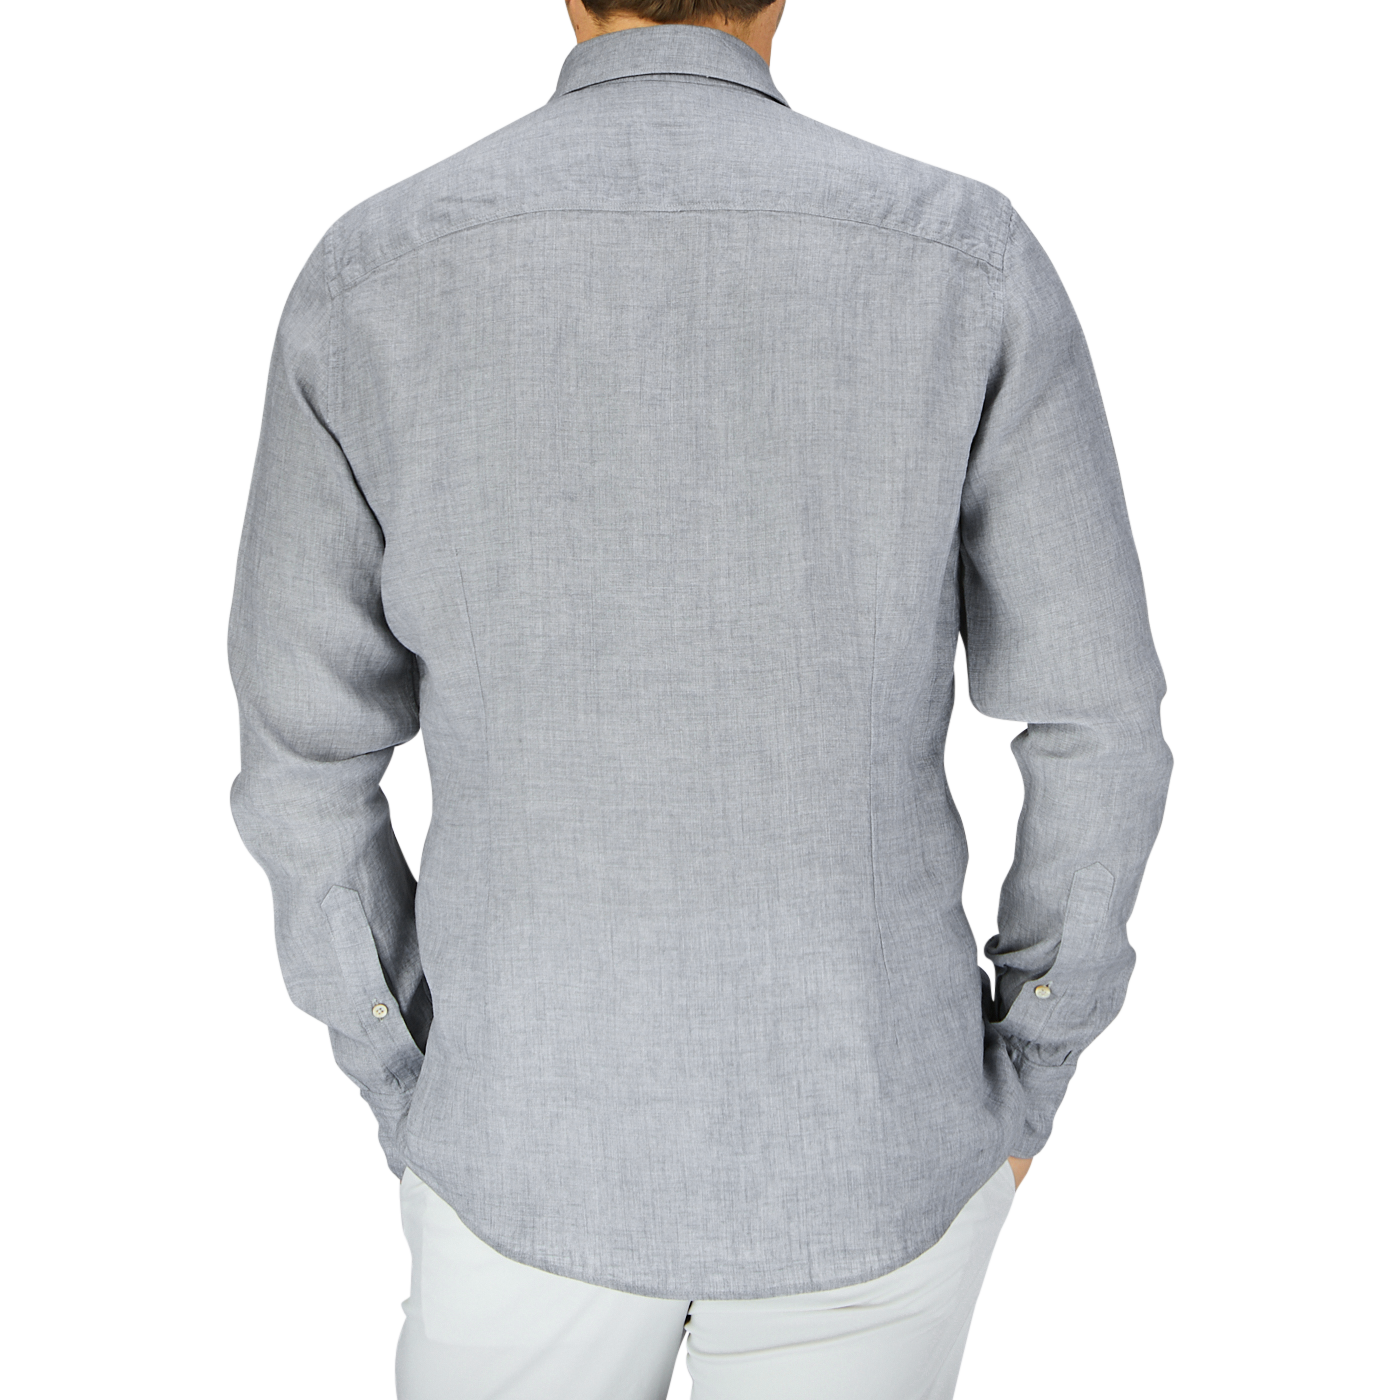 Rear view of a person wearing a Stenströms Light Grey Linen Fitted Body Shirt with cutaway collar and white pants.